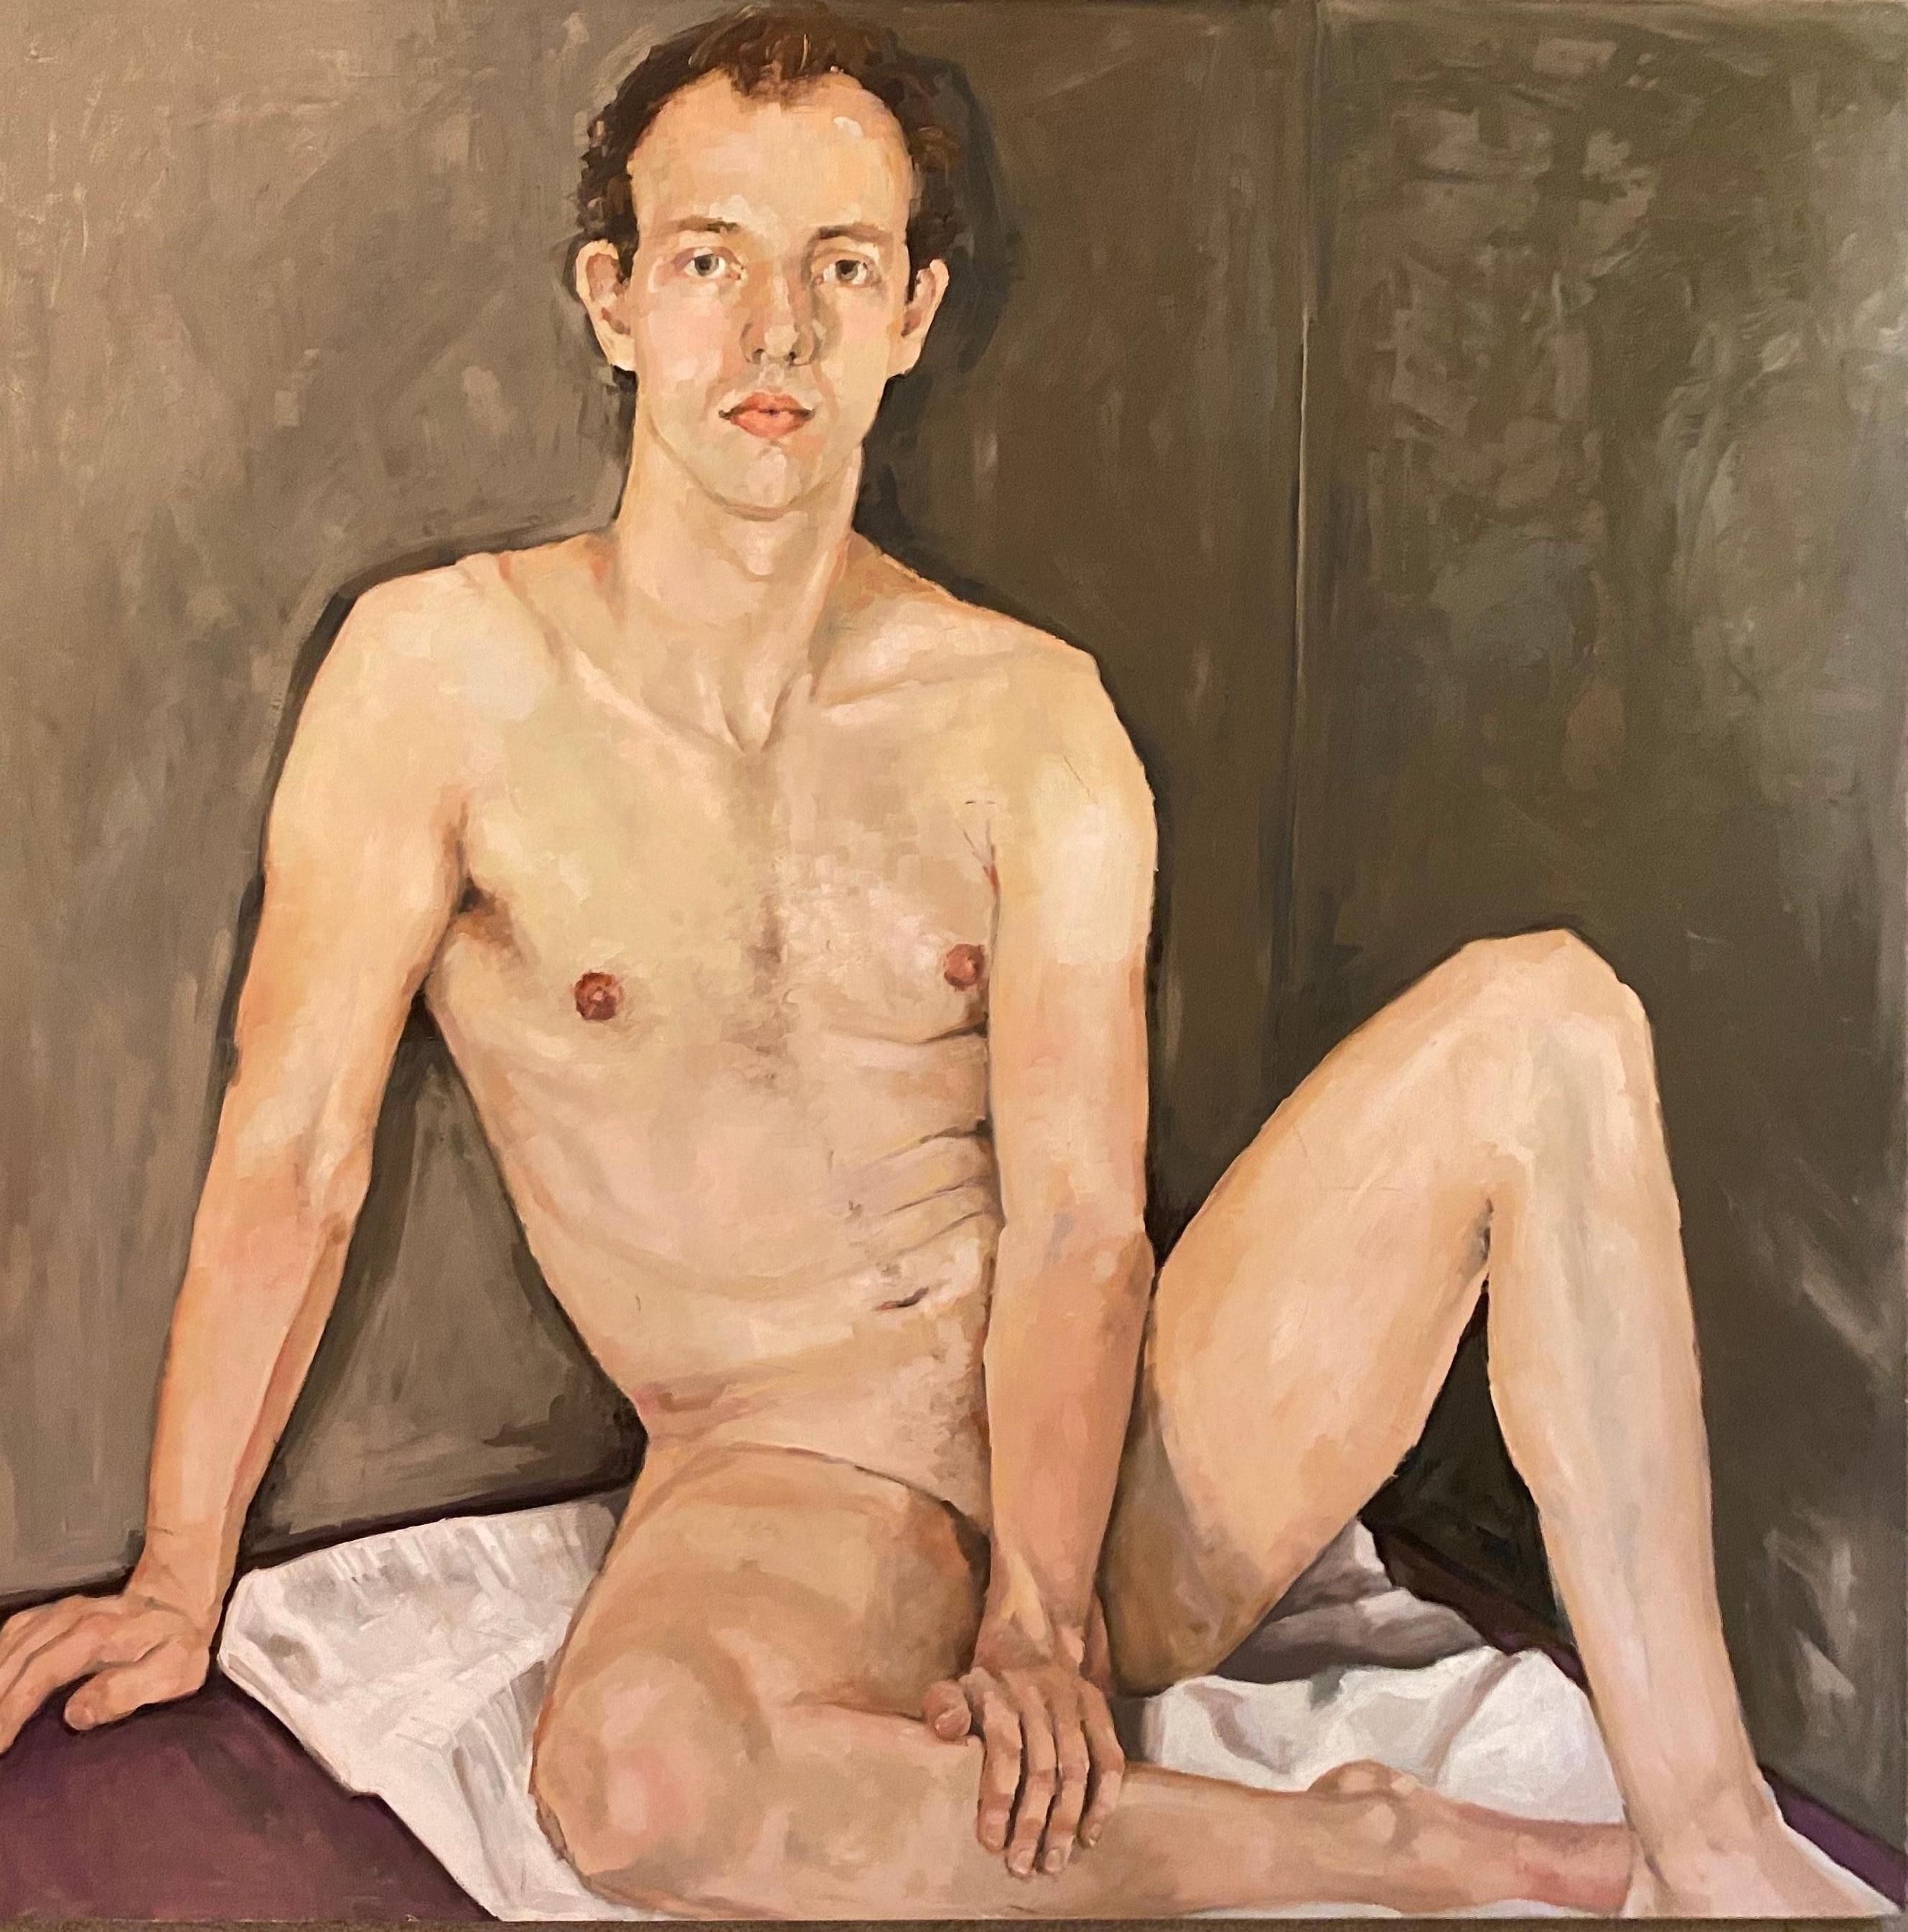 Shana Wilson Nude Painting - Seated Young Man Figurative Art,  Nude  Man Model Oil On Board Painting By Shana